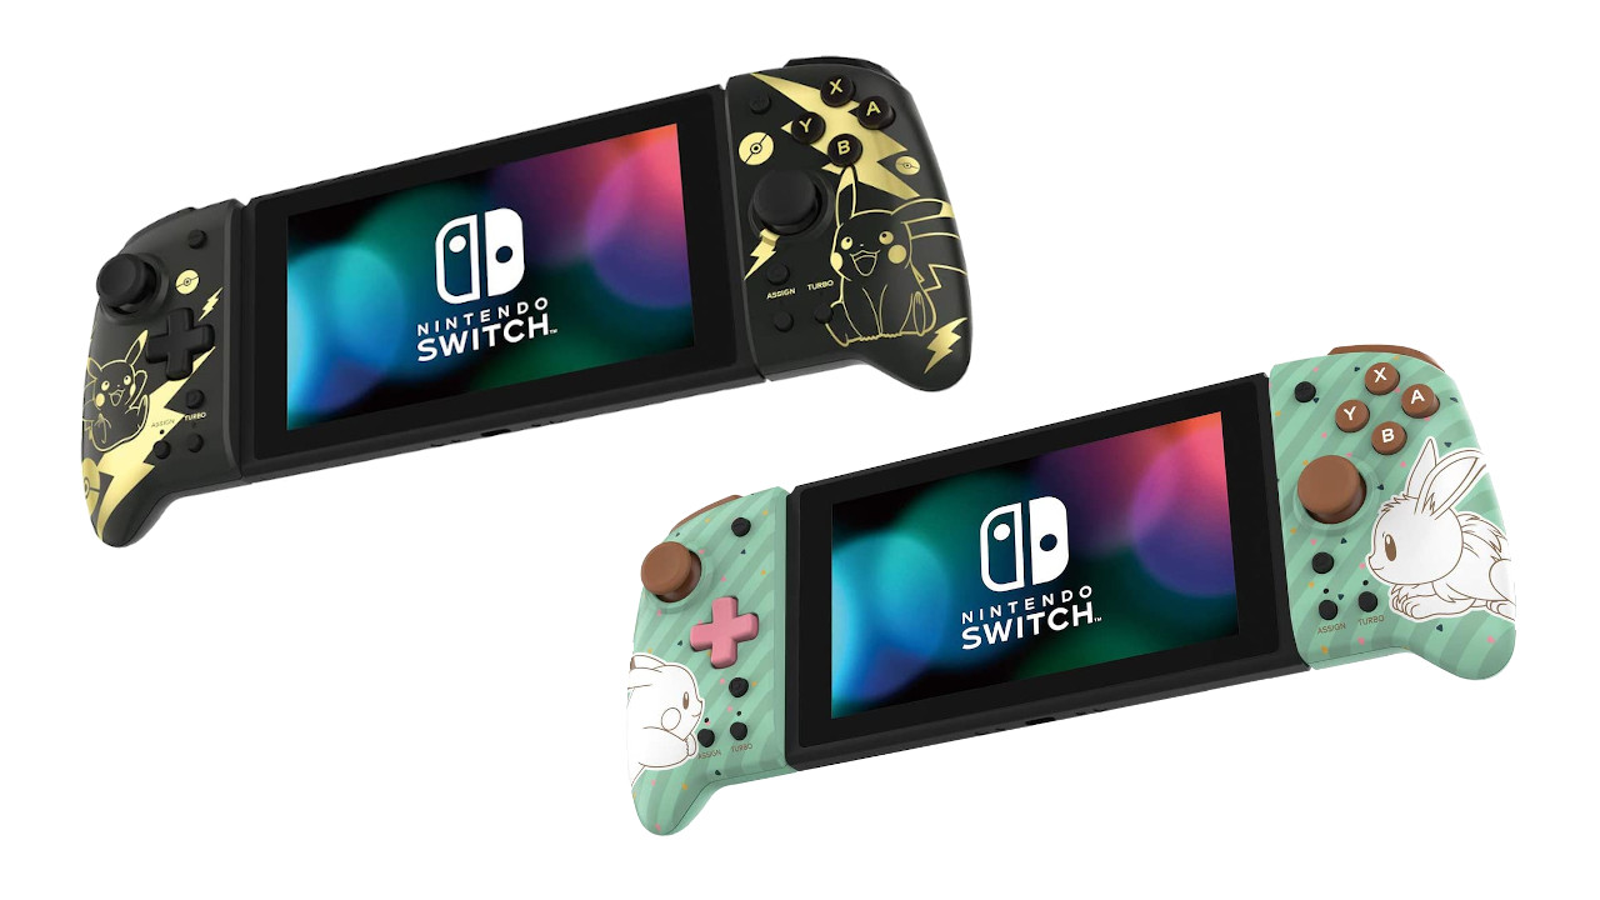 Pokémon-themed Nintendo Split coming is Pro A Switch for Hori Pad